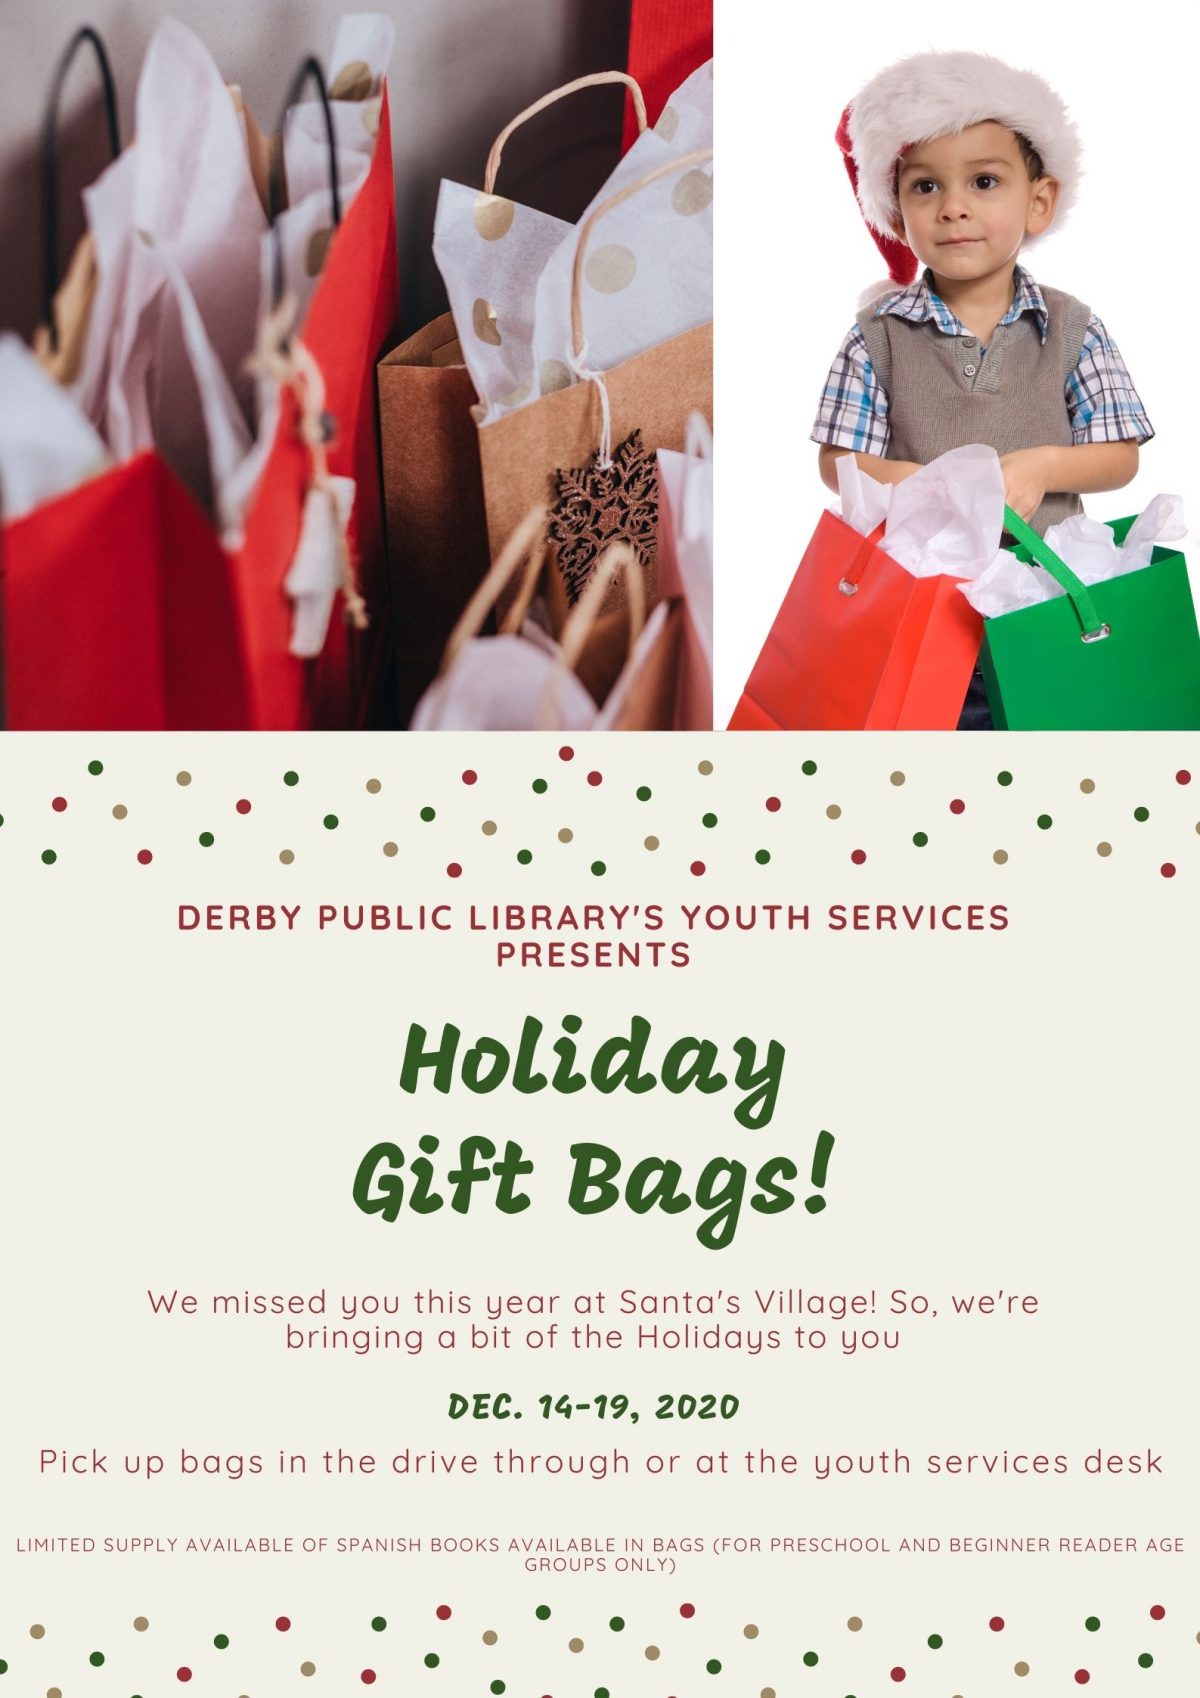 Holiday Bags for Children at the Library